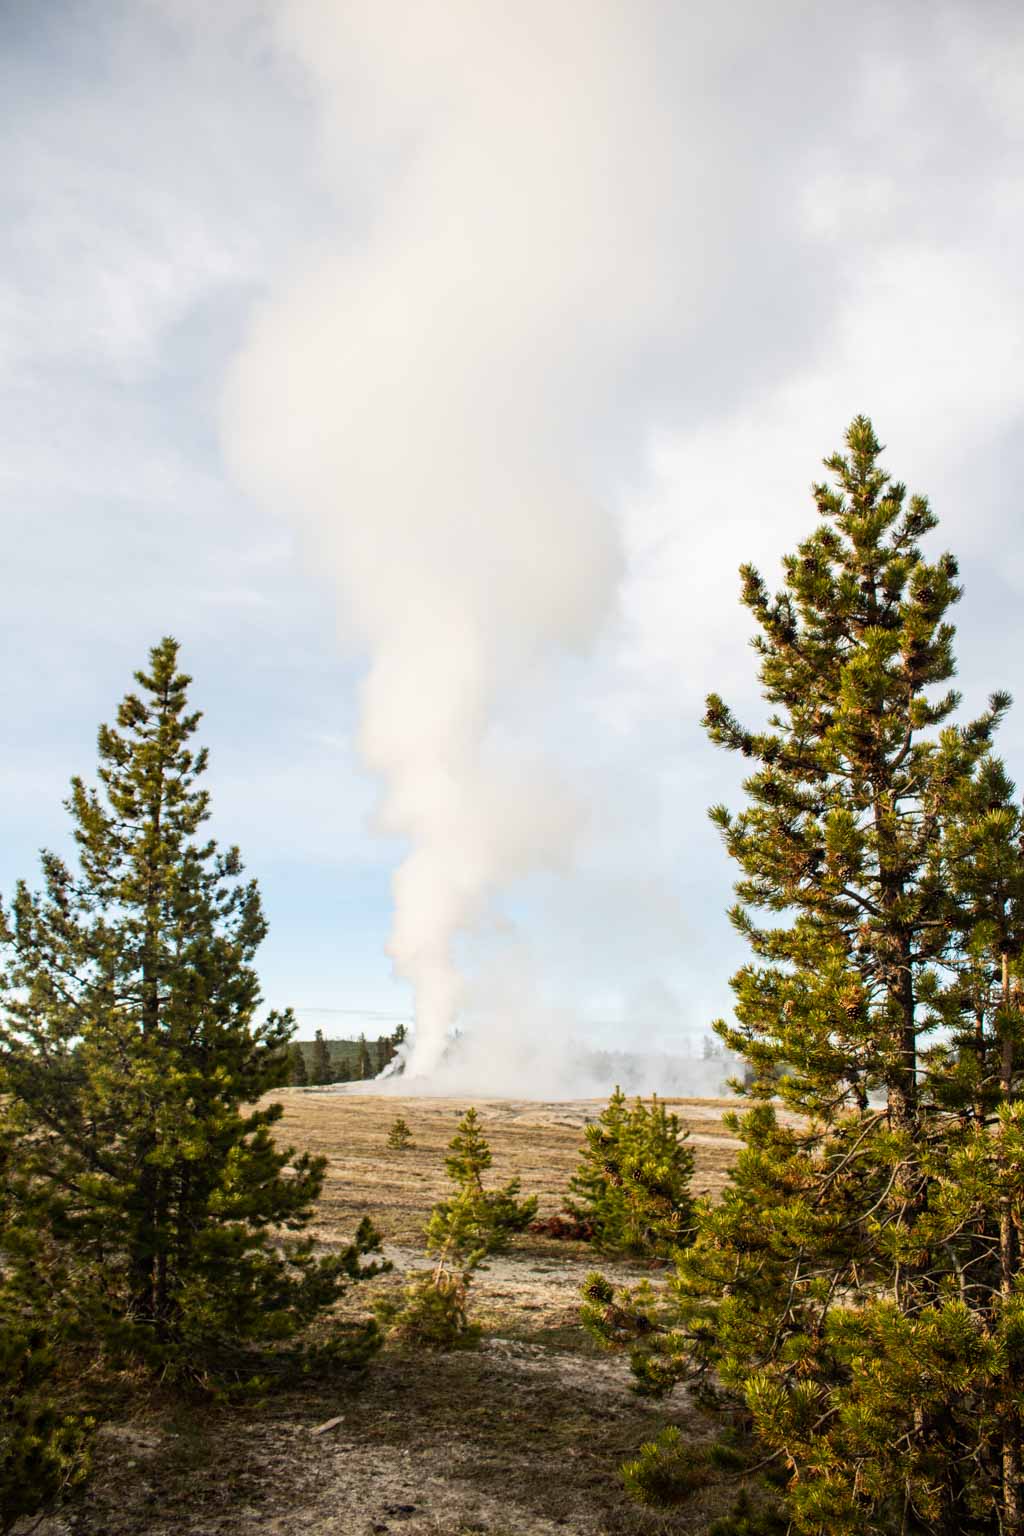 Old Faithful eruption in the morning, Yellowstone National Park